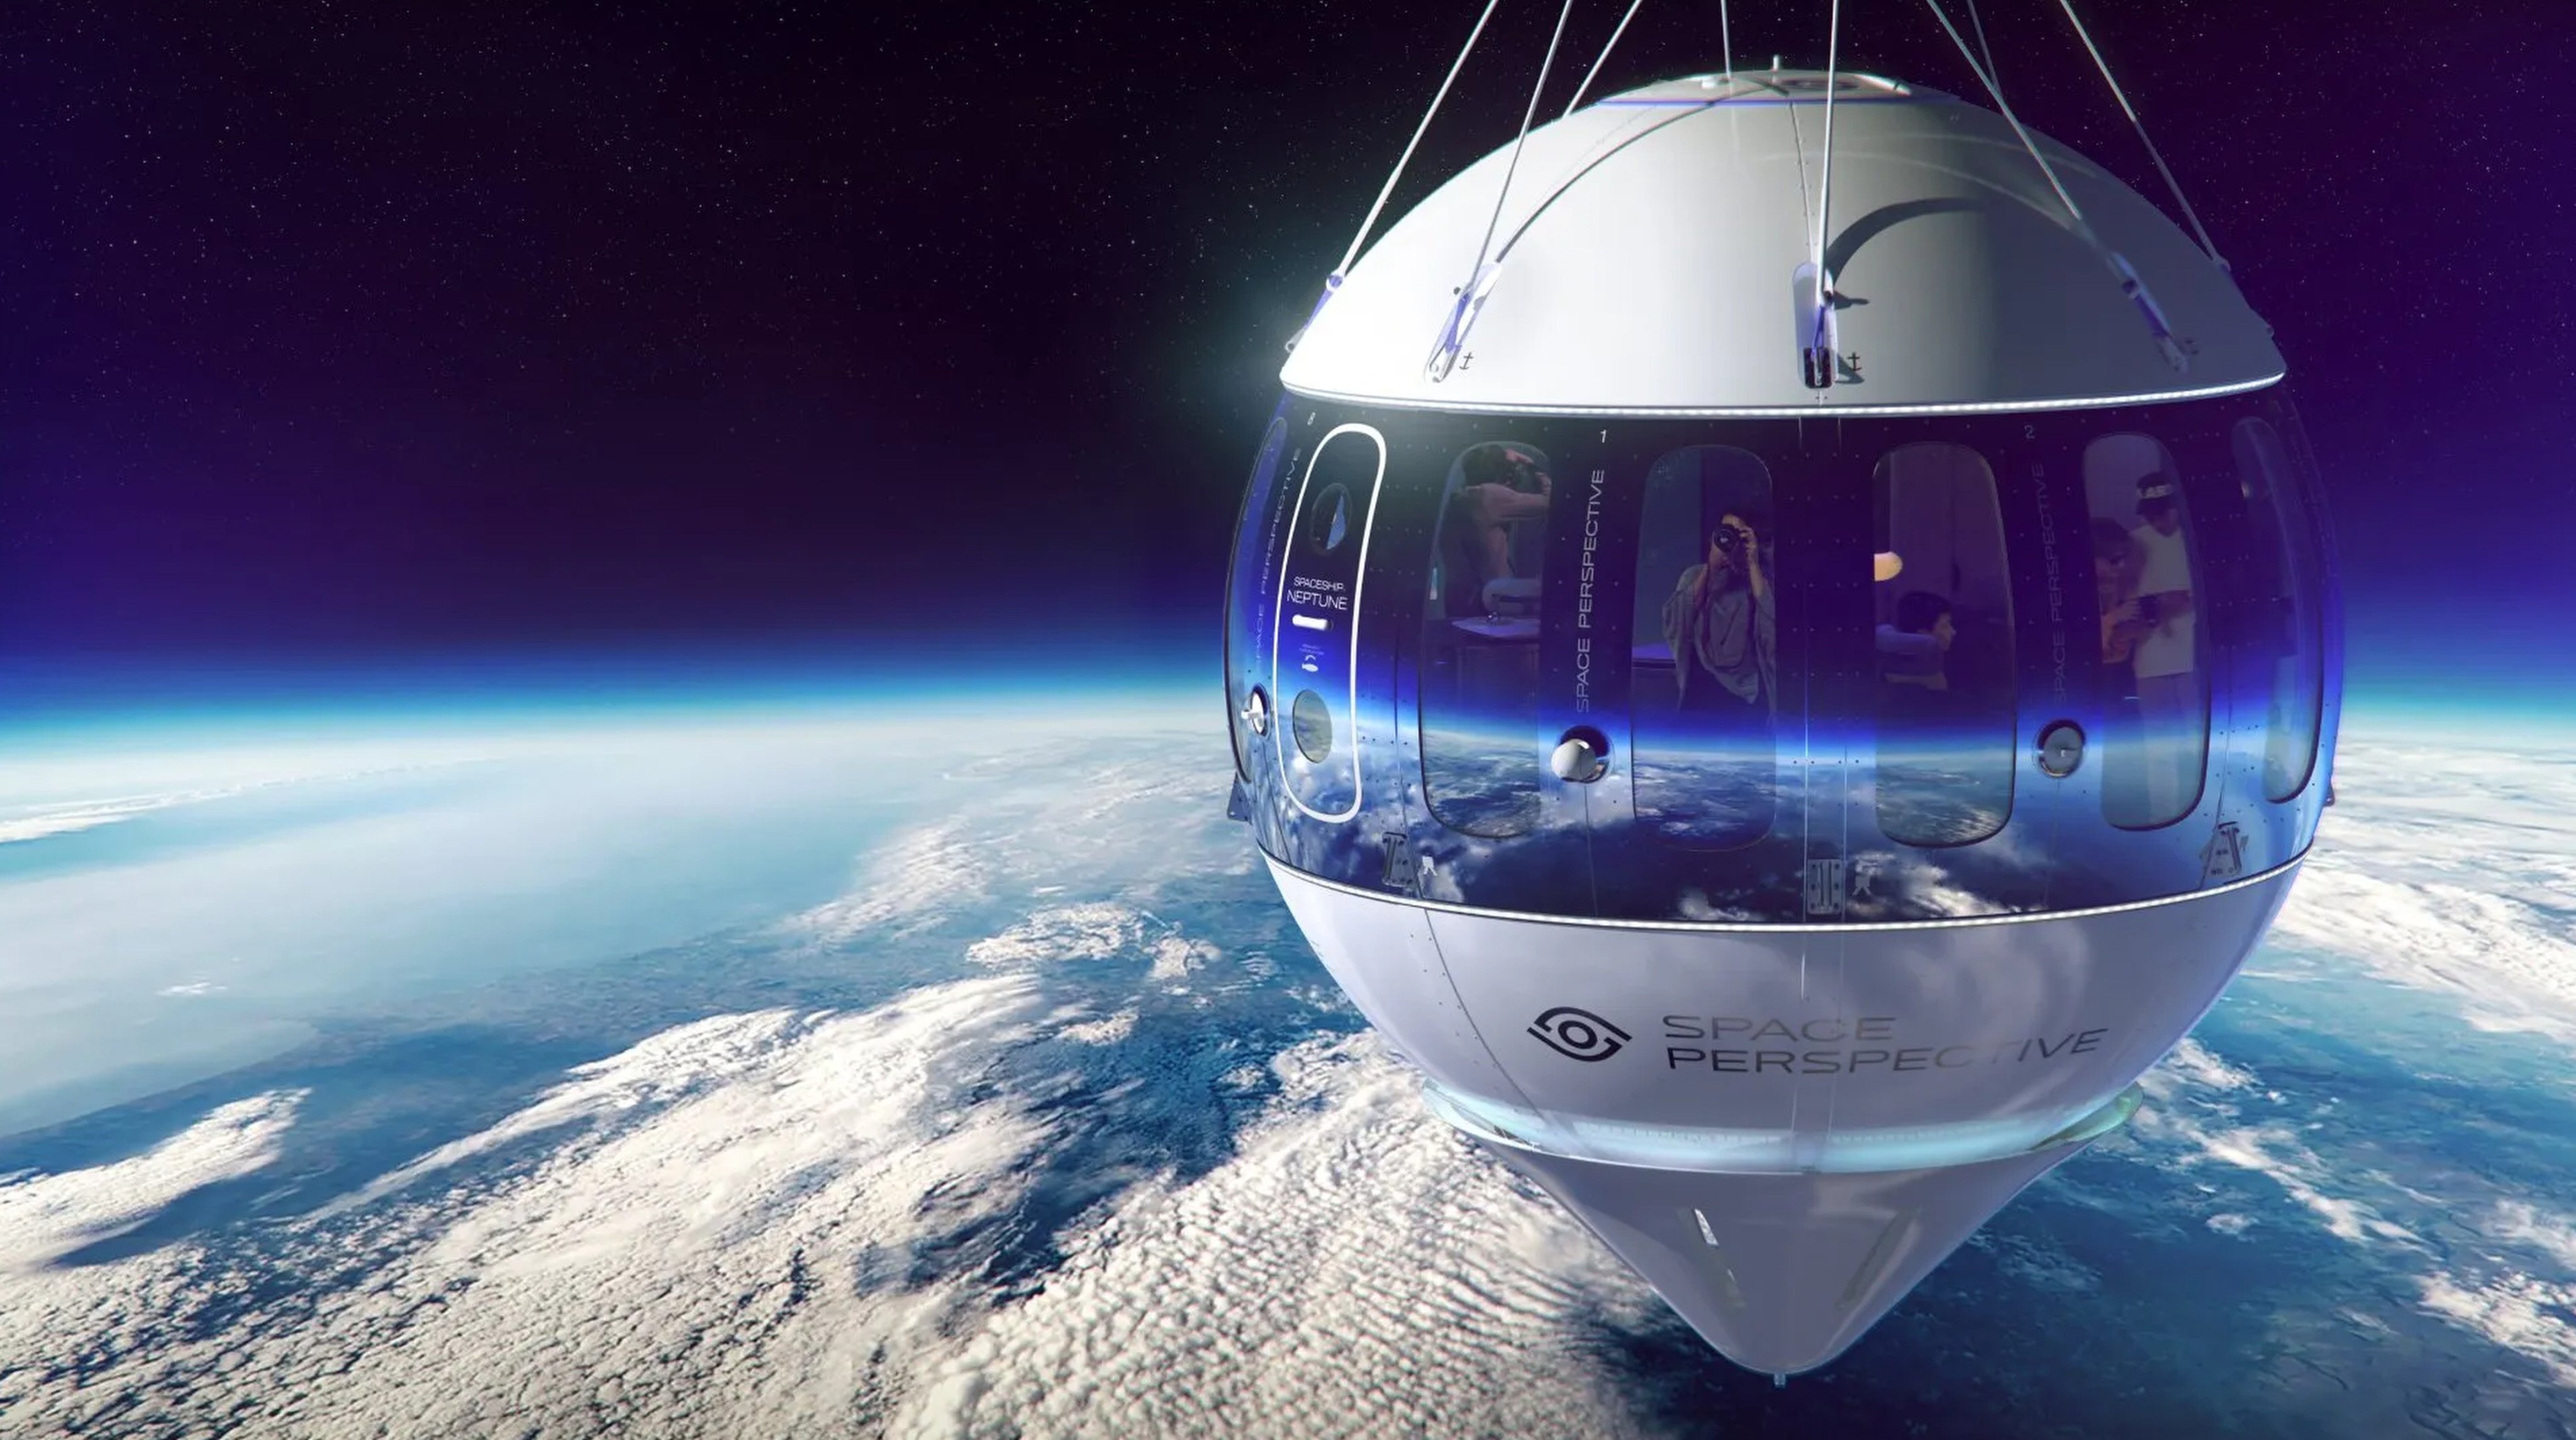 SpaceVIP will take guests 30 kilometres above sea level in a space balloon to dine on a luxury meal created by Danish chef Rasmus Munk while watching the sun rise over the earth’s curvature - at the cost of US$500,000. Photo: SpaceVIP